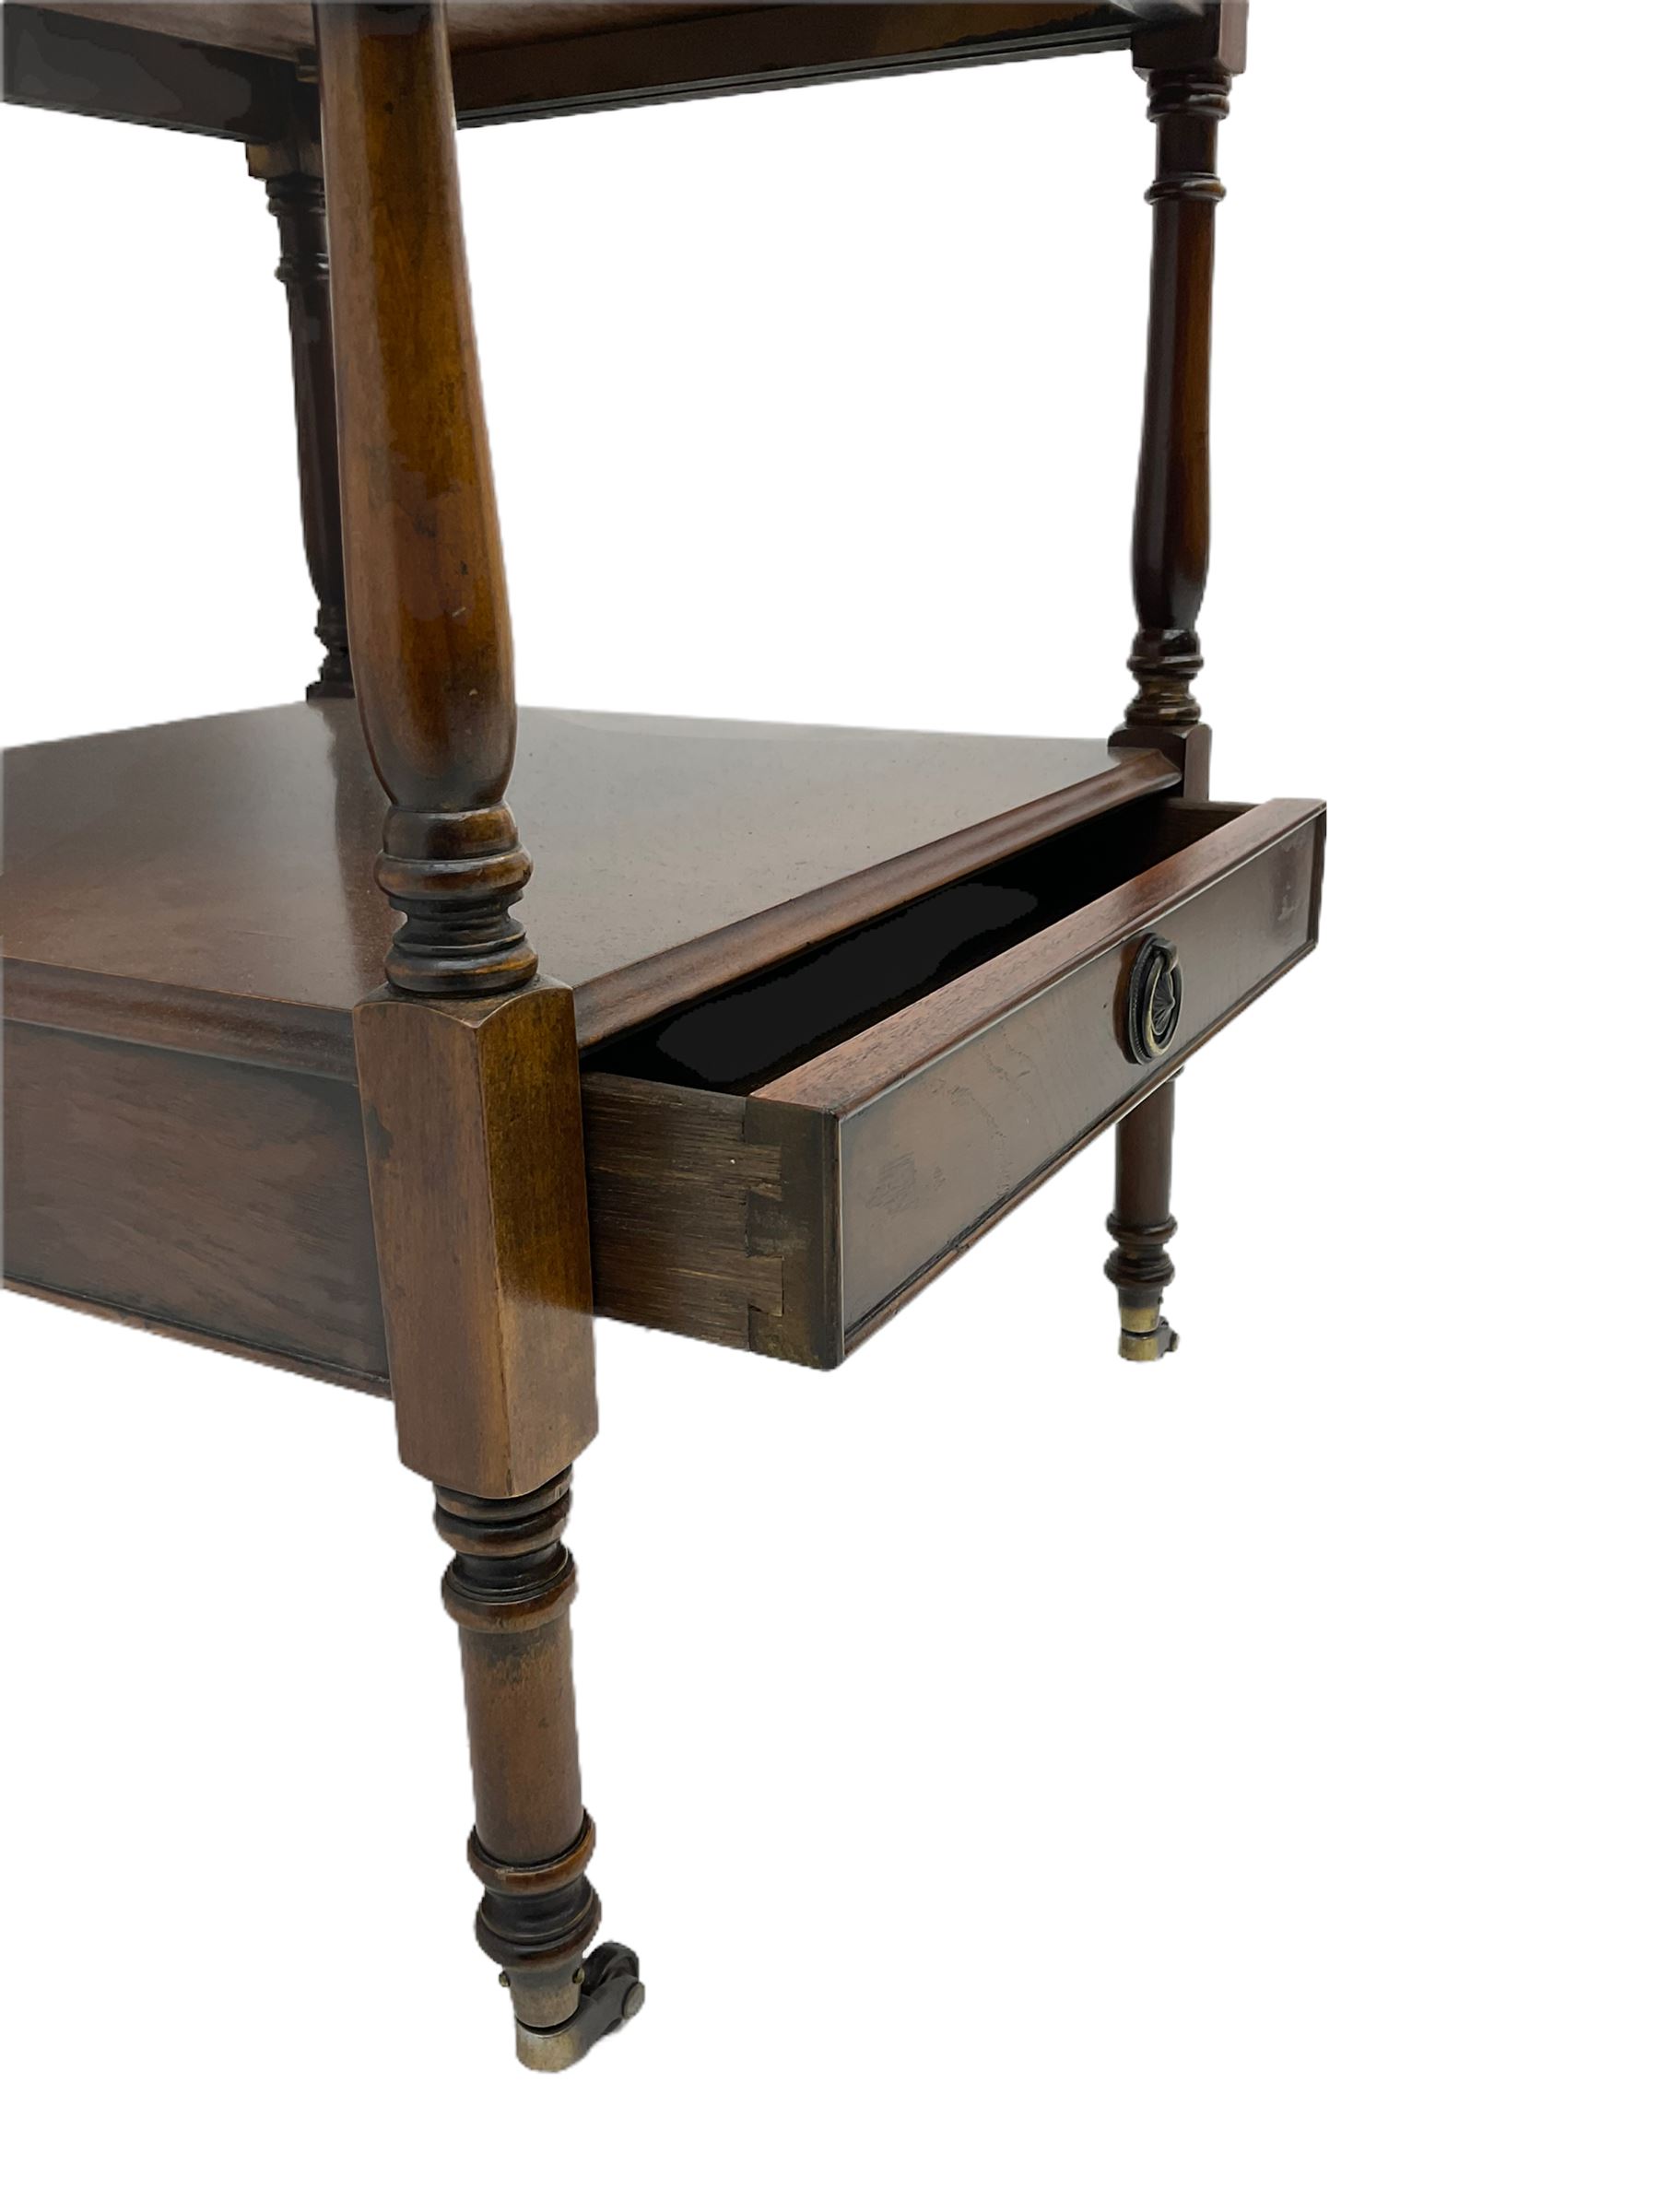 Figured walnut two tier occasional table - Image 7 of 8